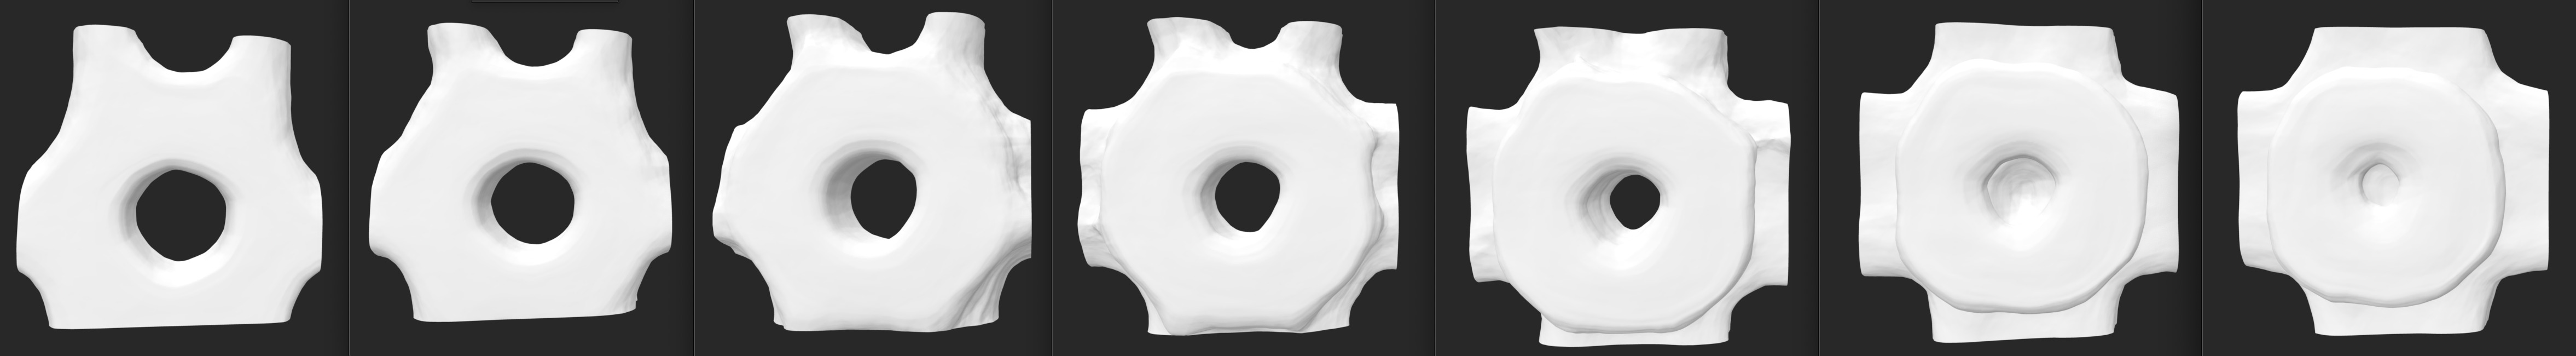 Variants of 3D objects that our trained AI system has proposed.